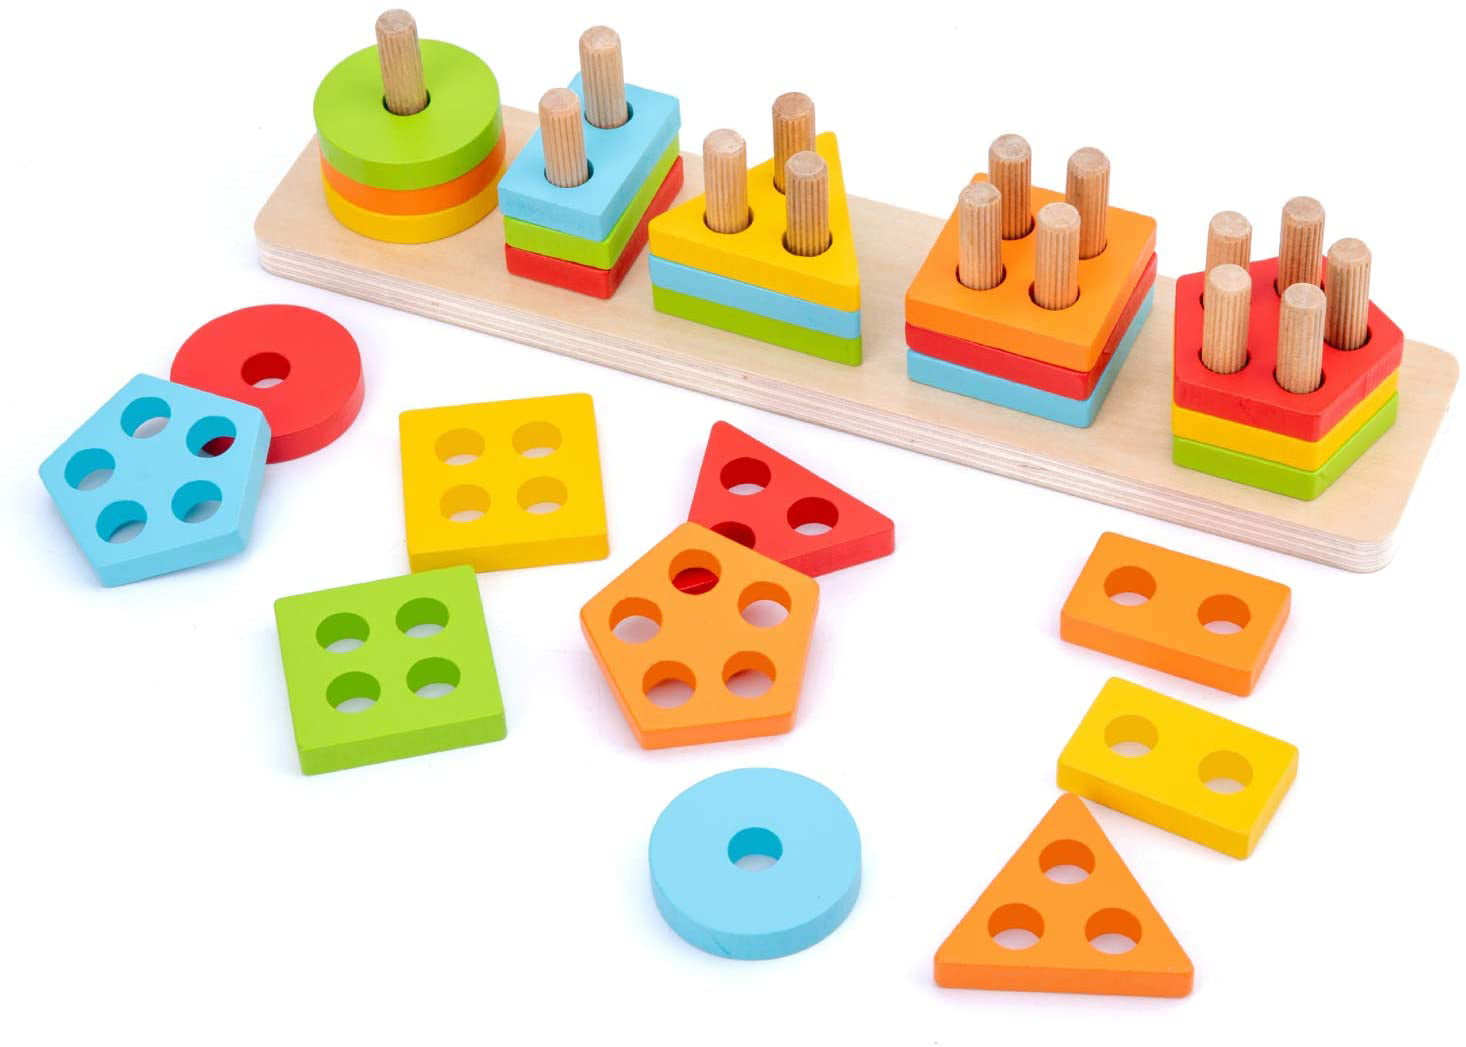 Clors and Shape Sorting Educational Toy Kids Children Sorting Game